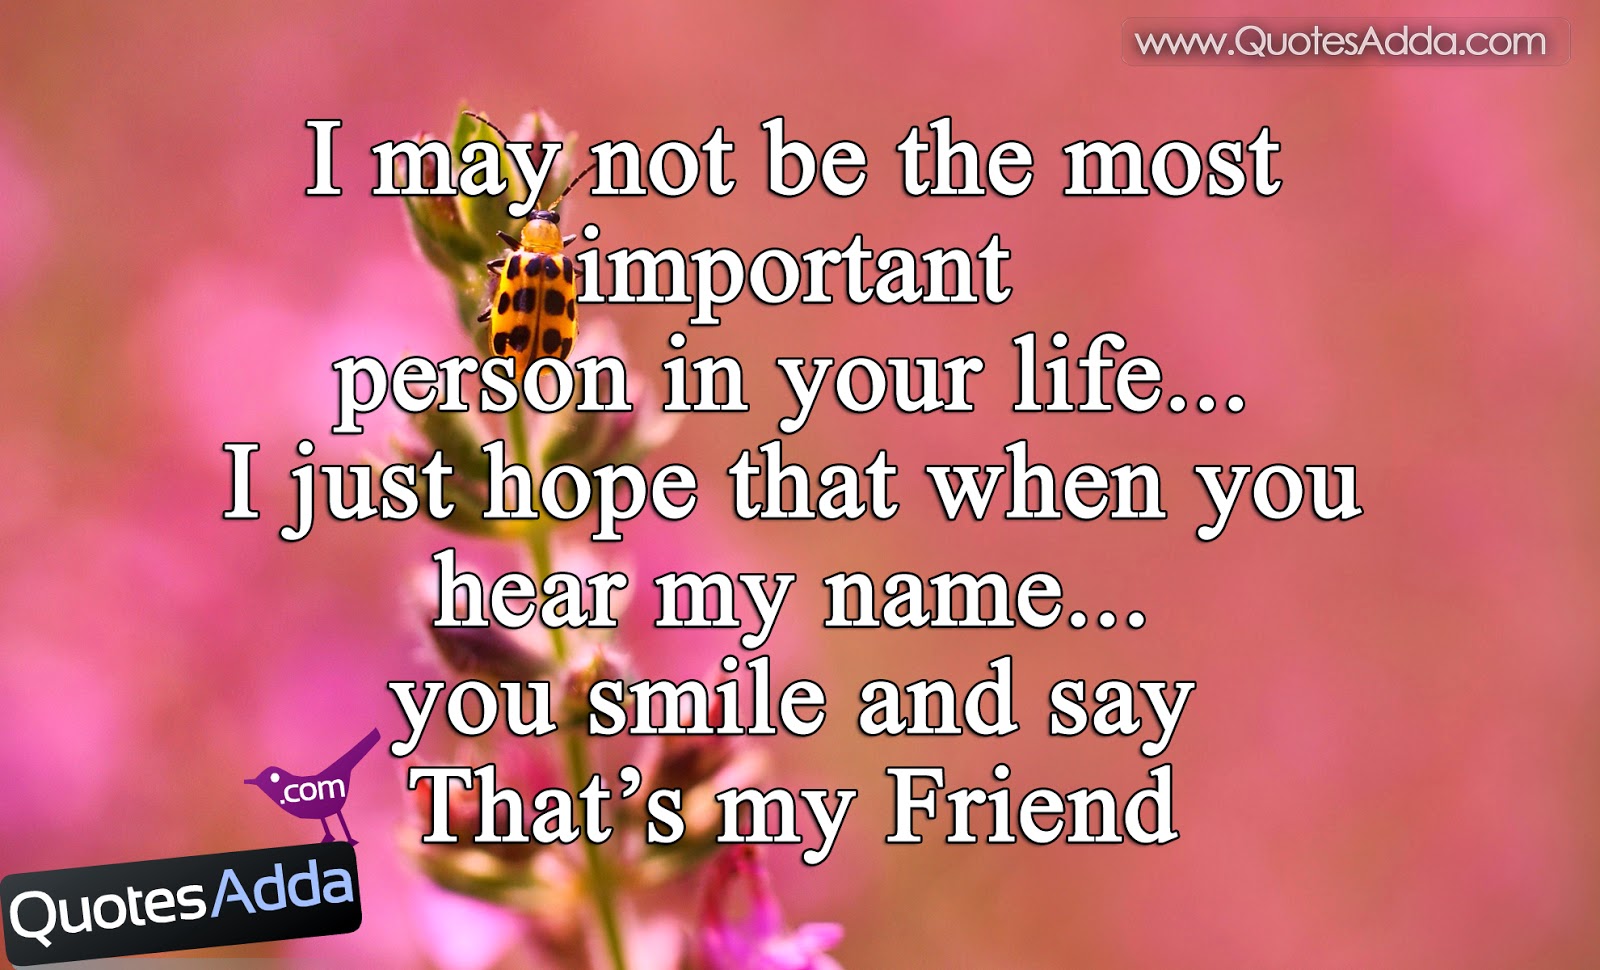 Emotional Friendship Quotes In Kannada Best friendship quotations in english quotesadda